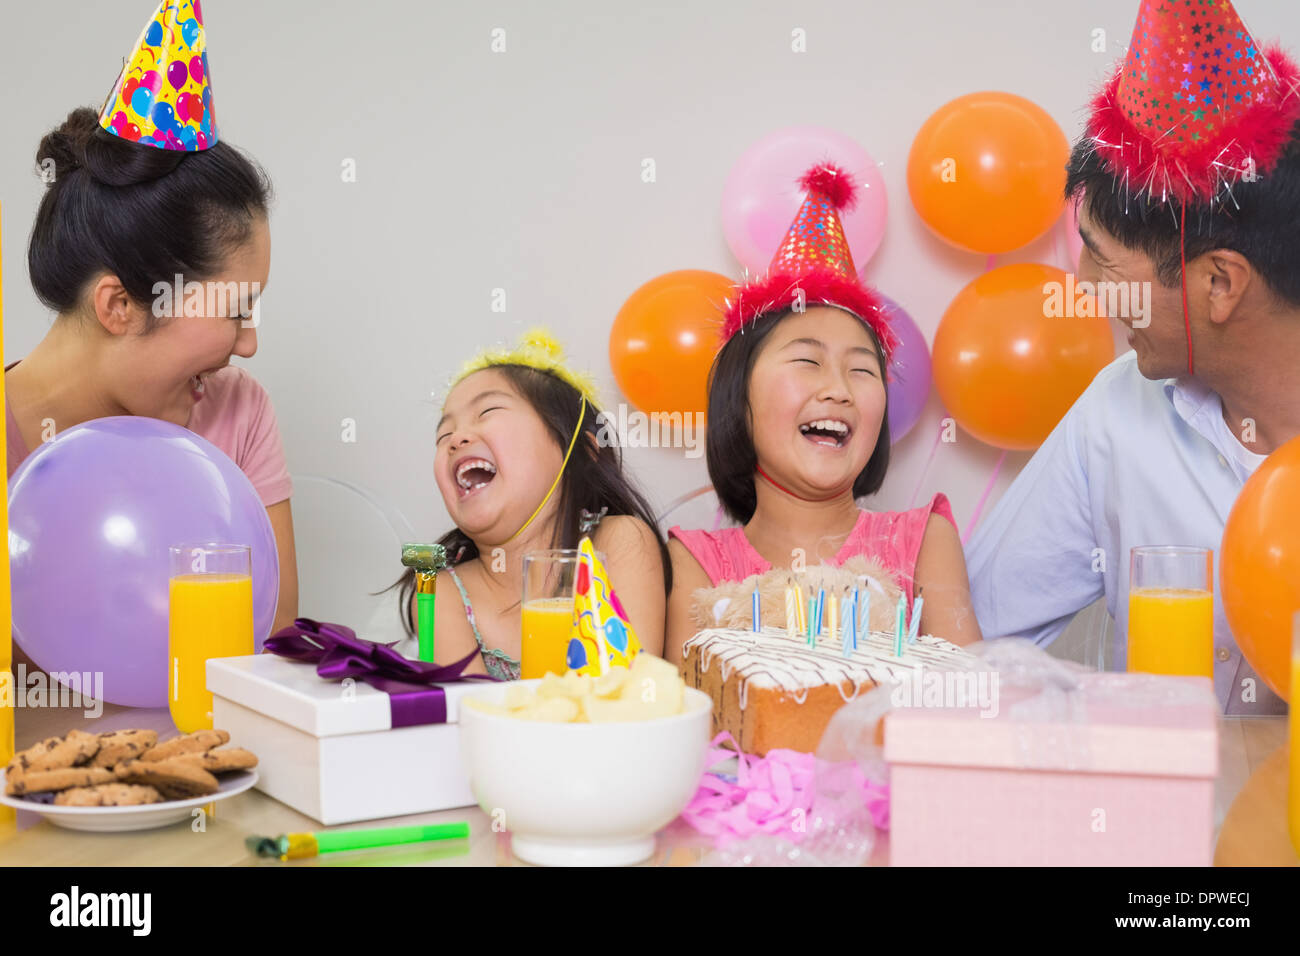 Cheerful family with cake and gifts at a birthday party Stock Photo